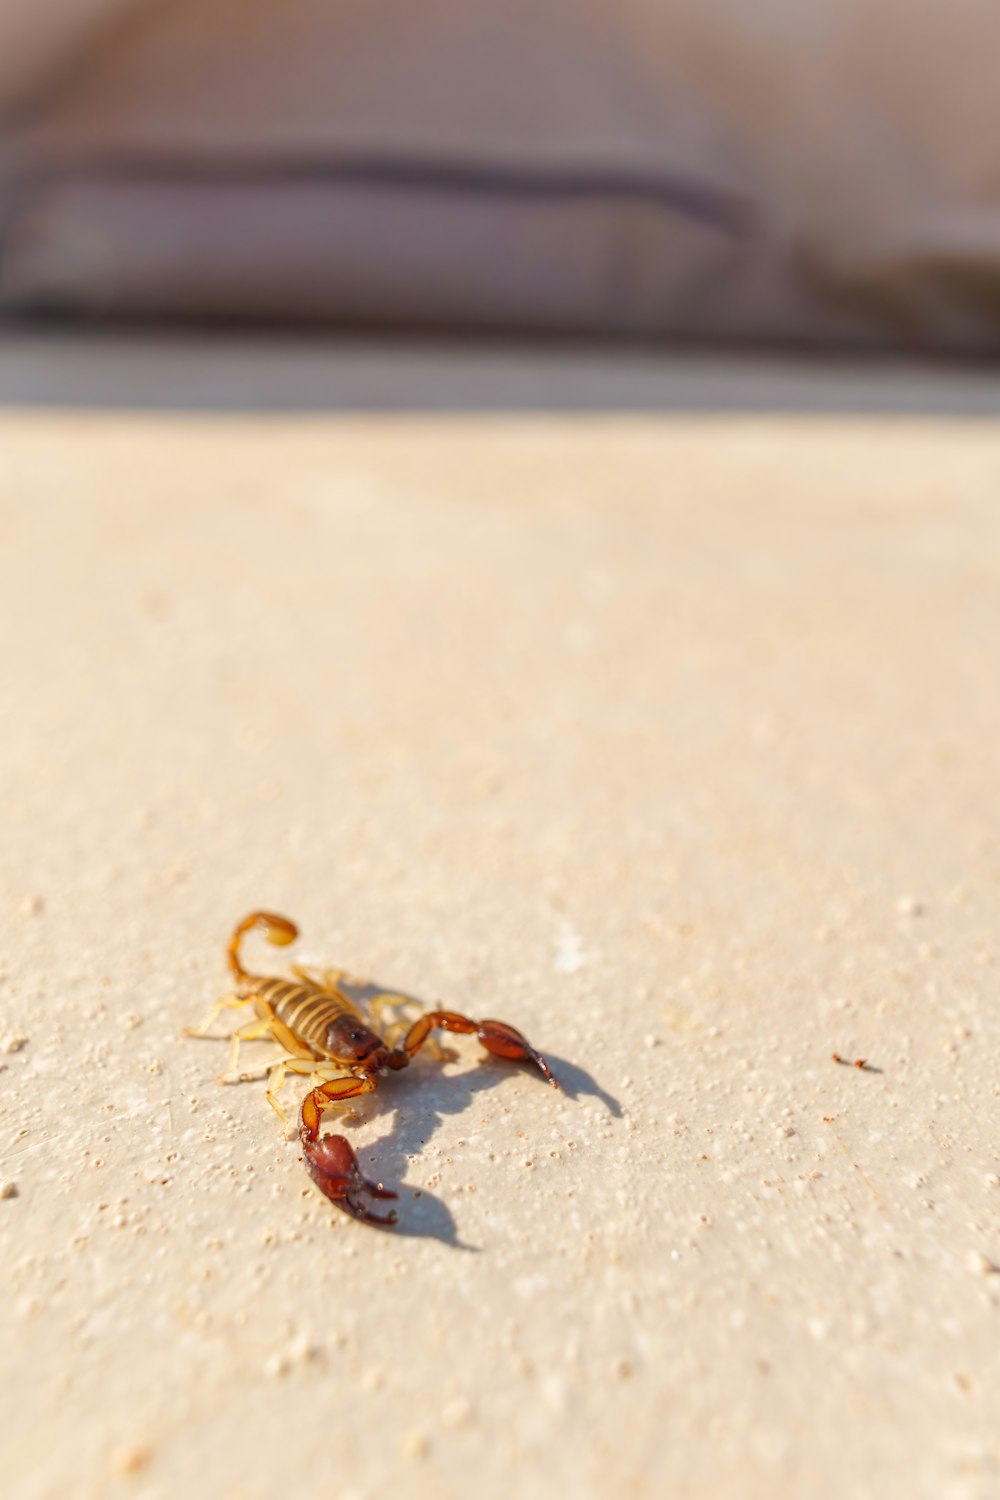 a scorpion crawling on the ground in front of a bed